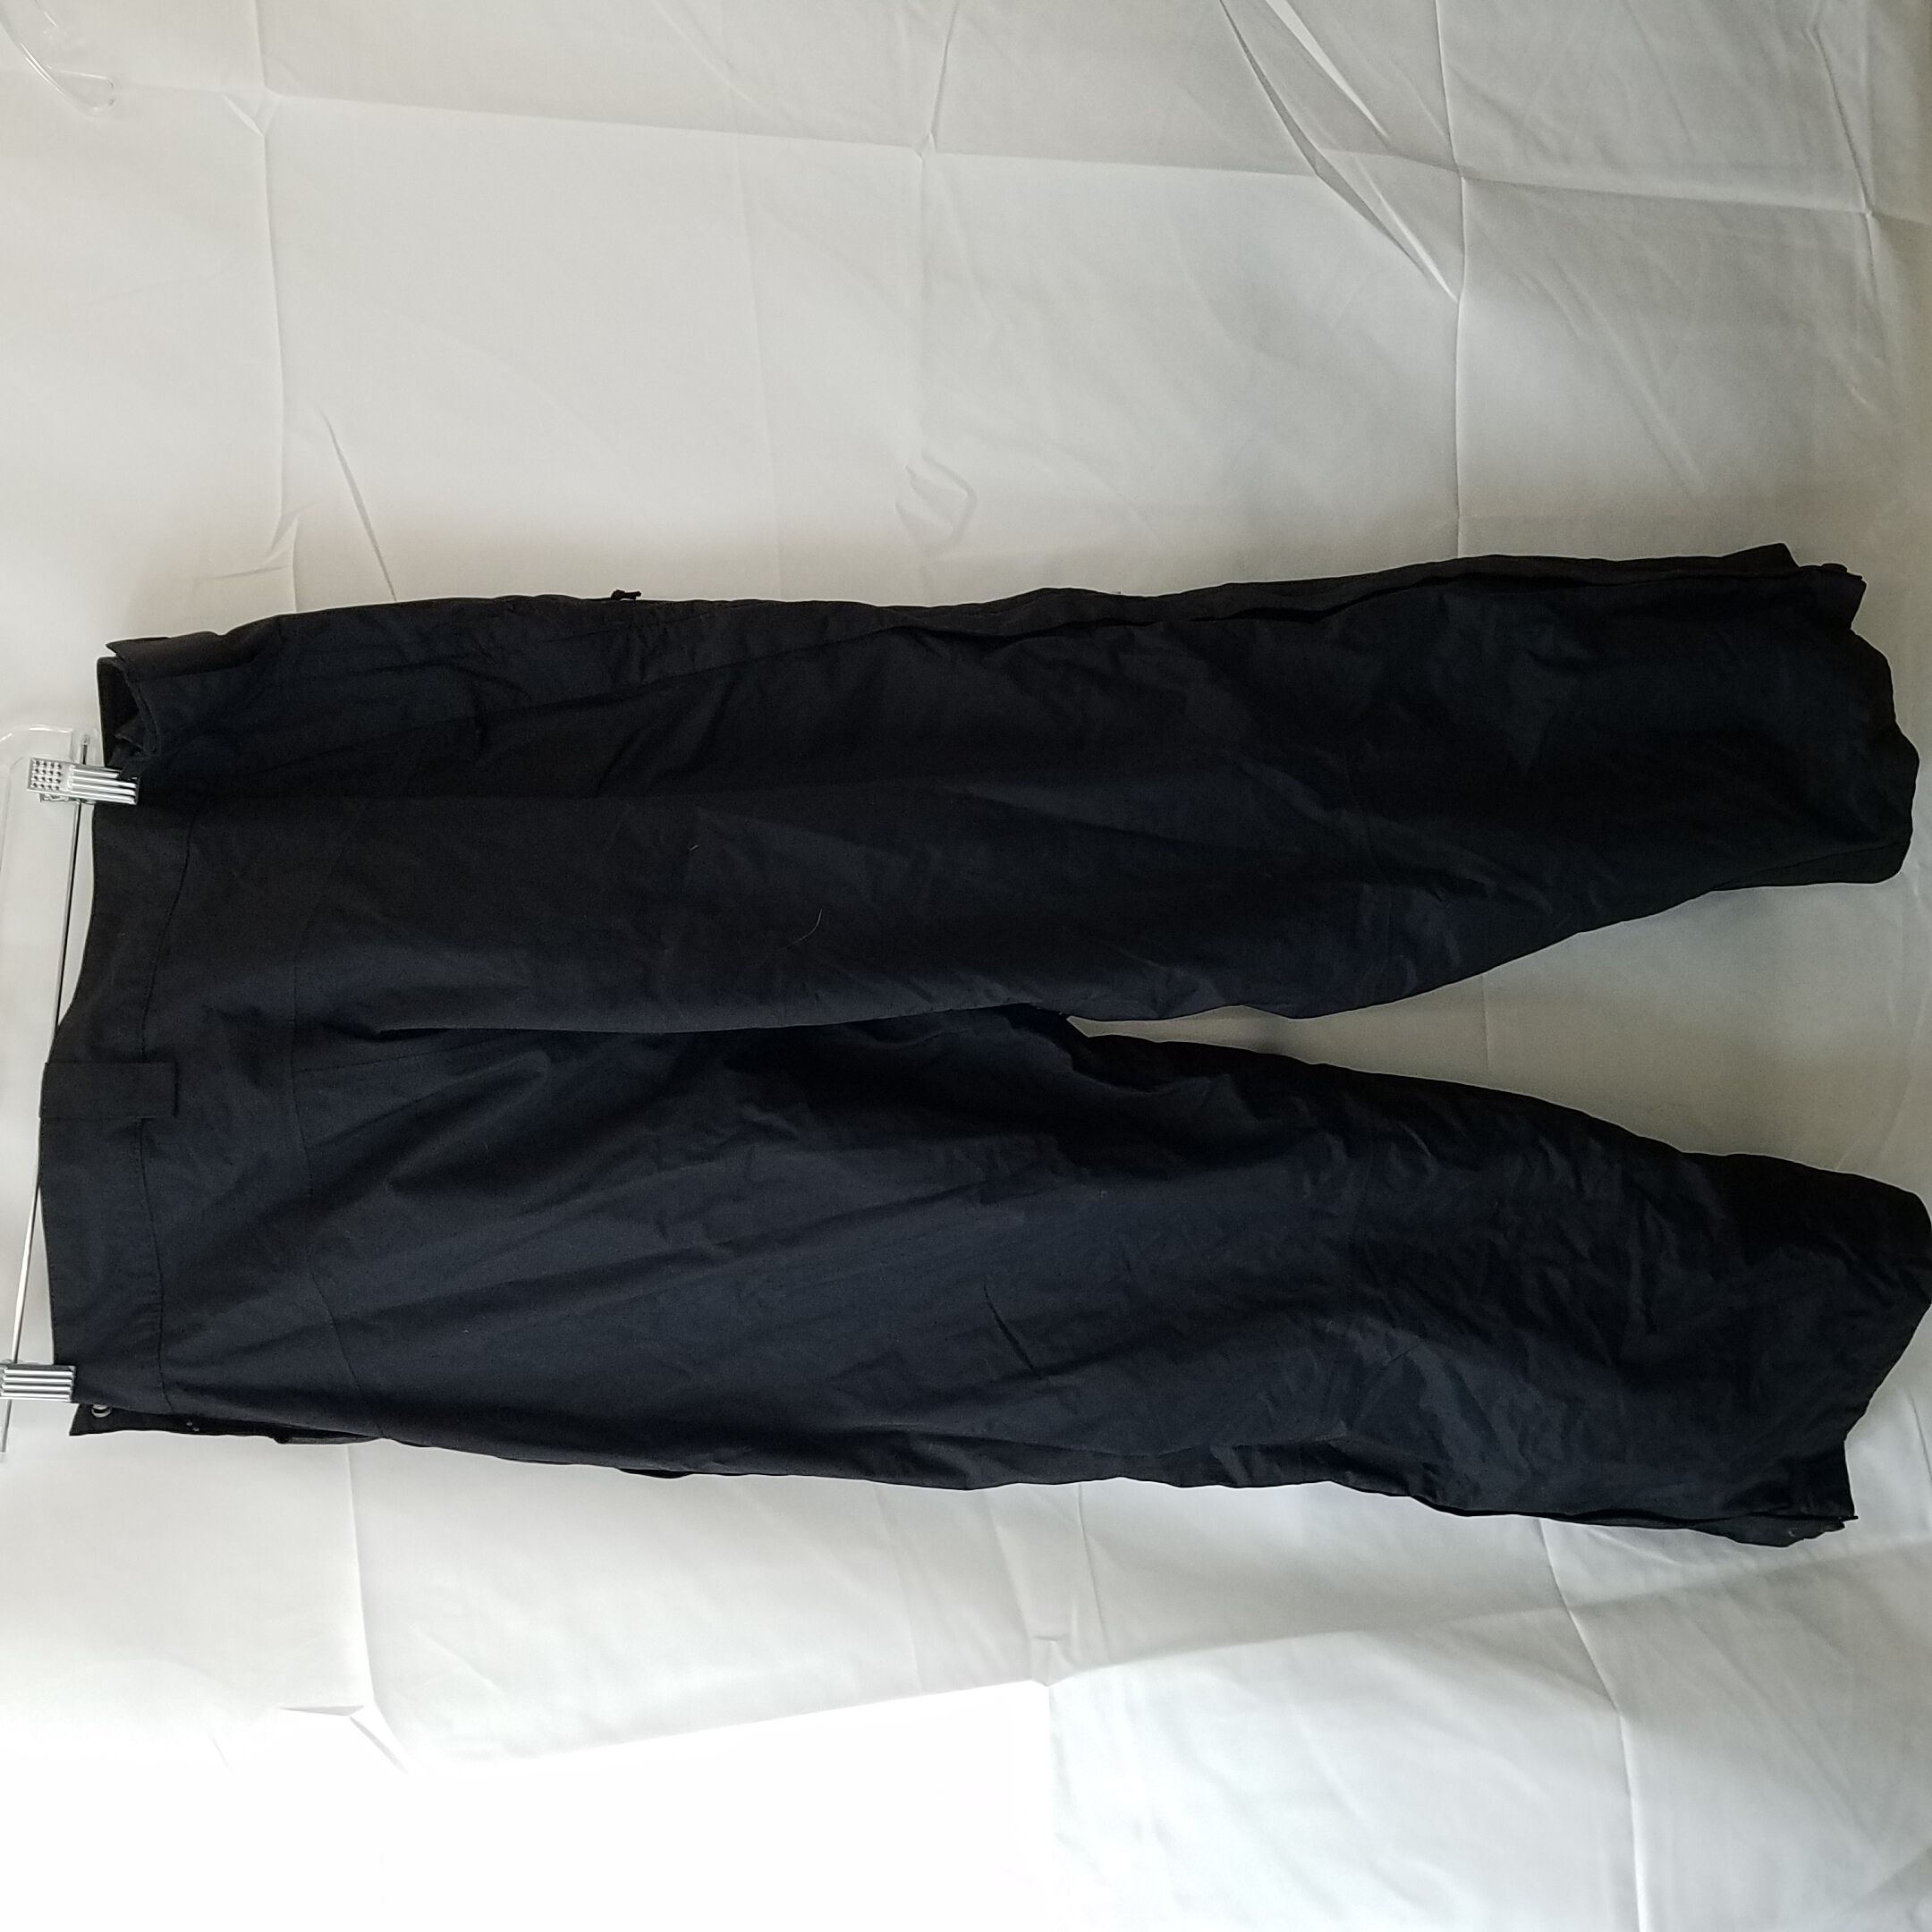 Buy the The North Face Black Size L Nylon Pants w/Suspenders